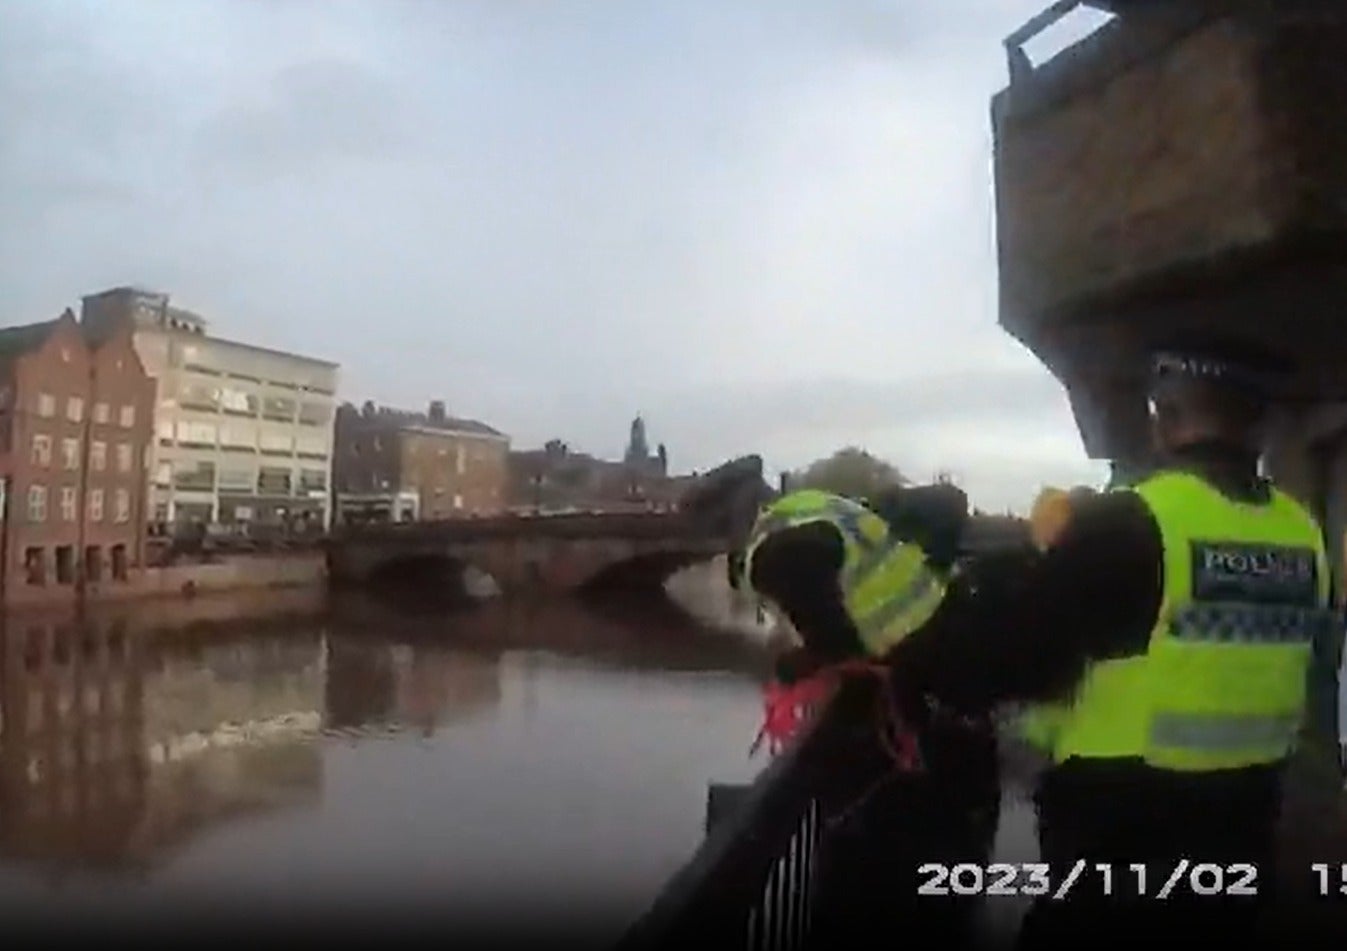 Police at the River Ouse carrying out a rescue of the man who was drowning